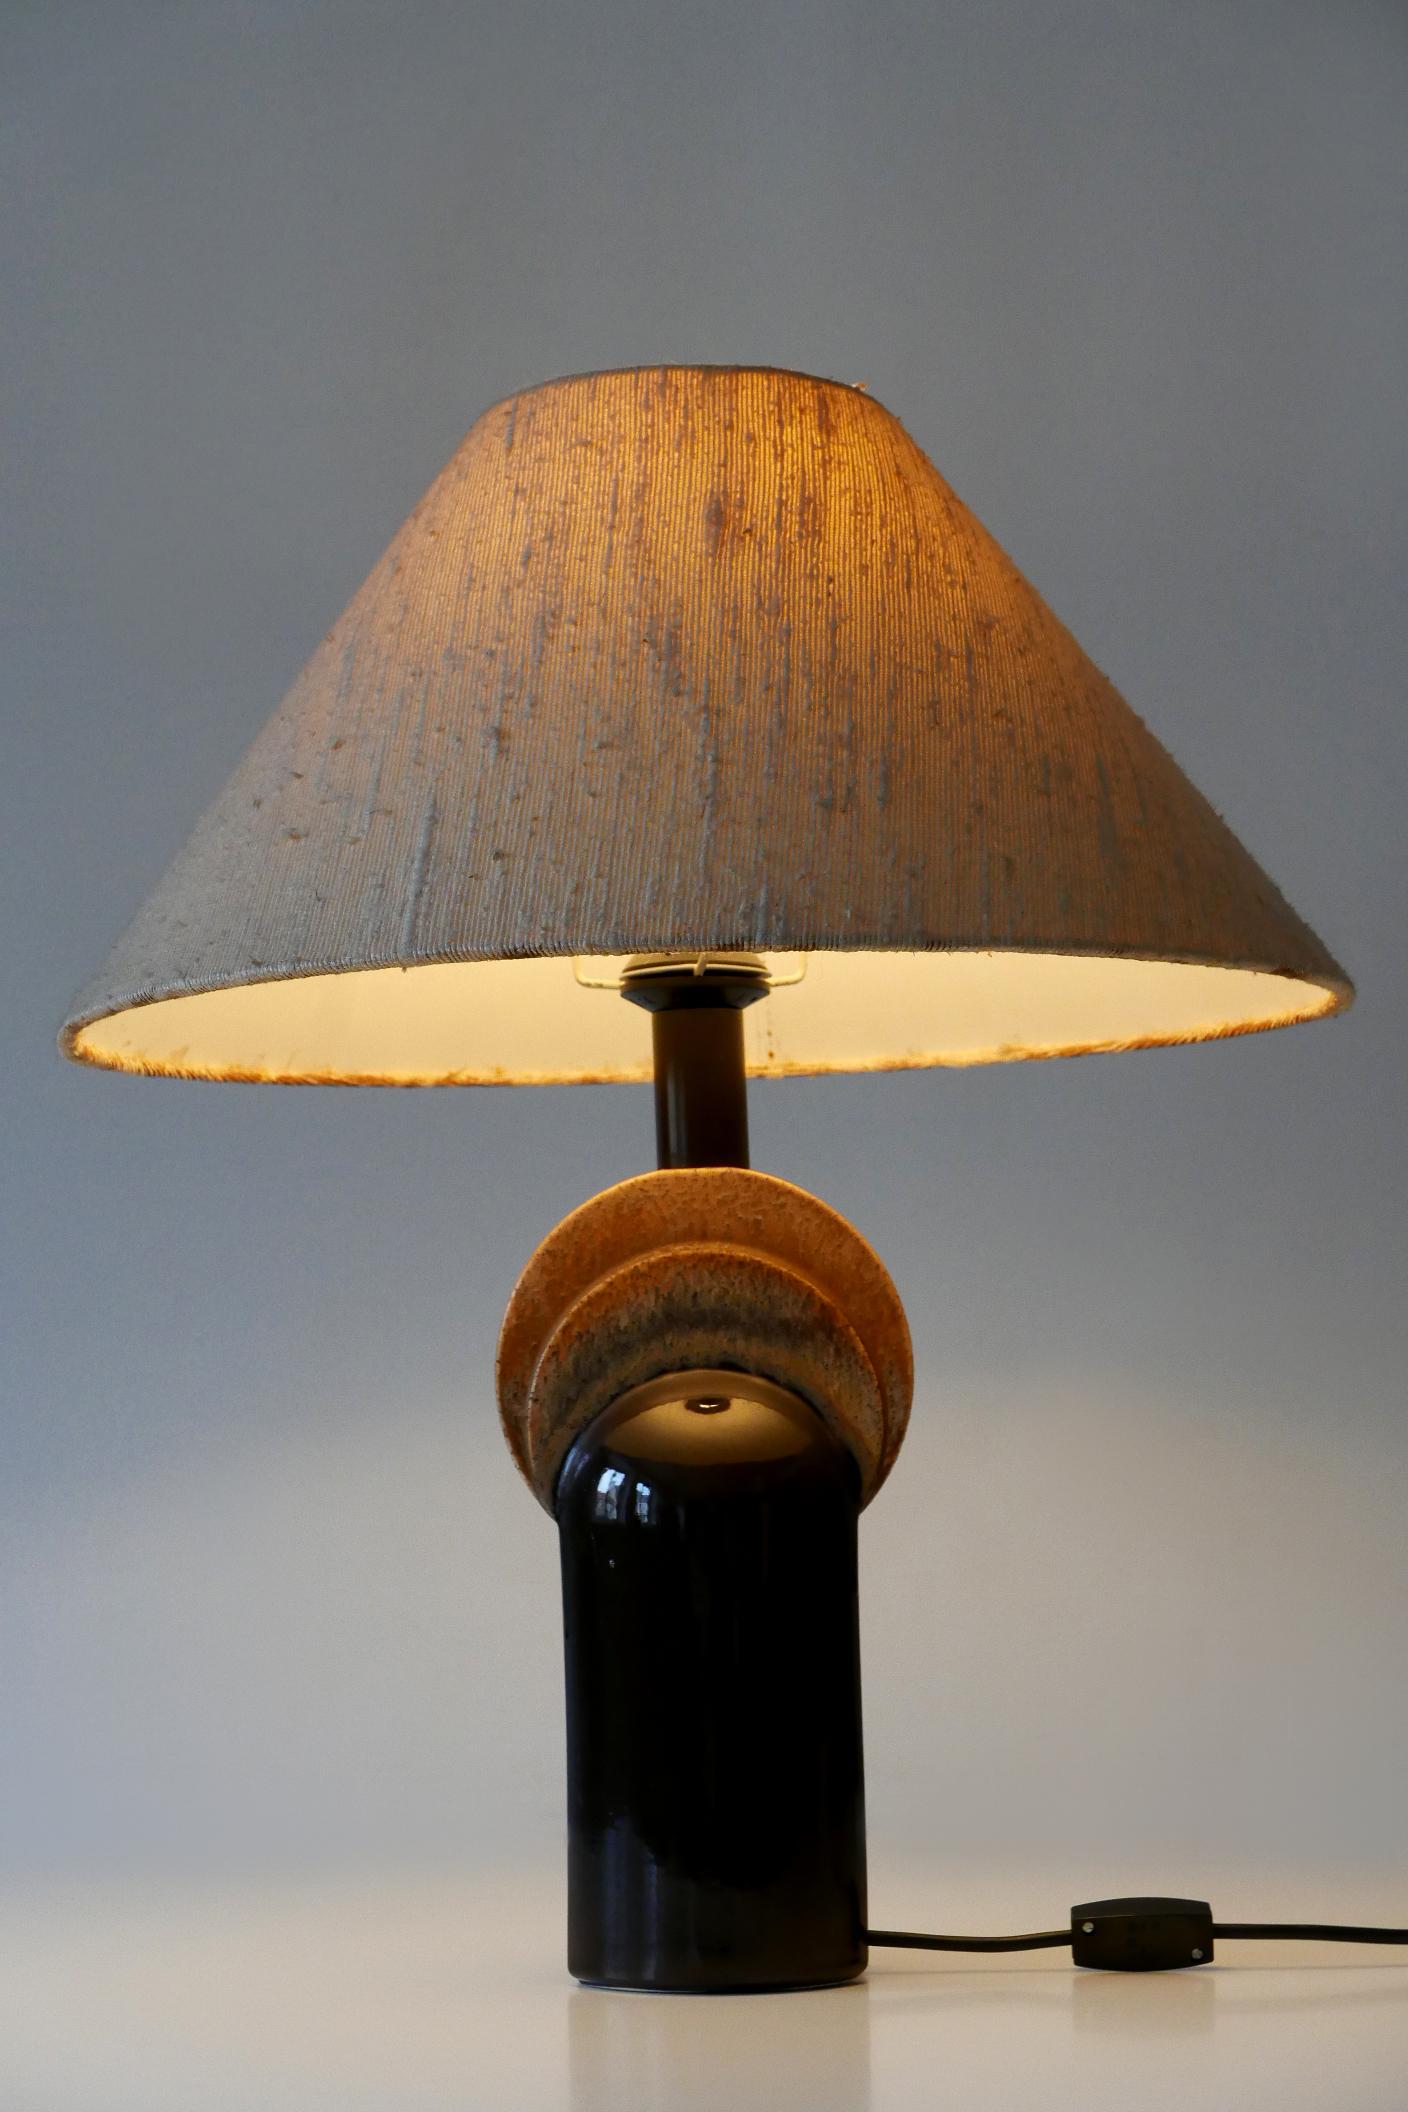 Elegant Mid-Century Modern Ceramic Table Lamp by Leola Design Germany 1960s In Good Condition For Sale In Munich, DE